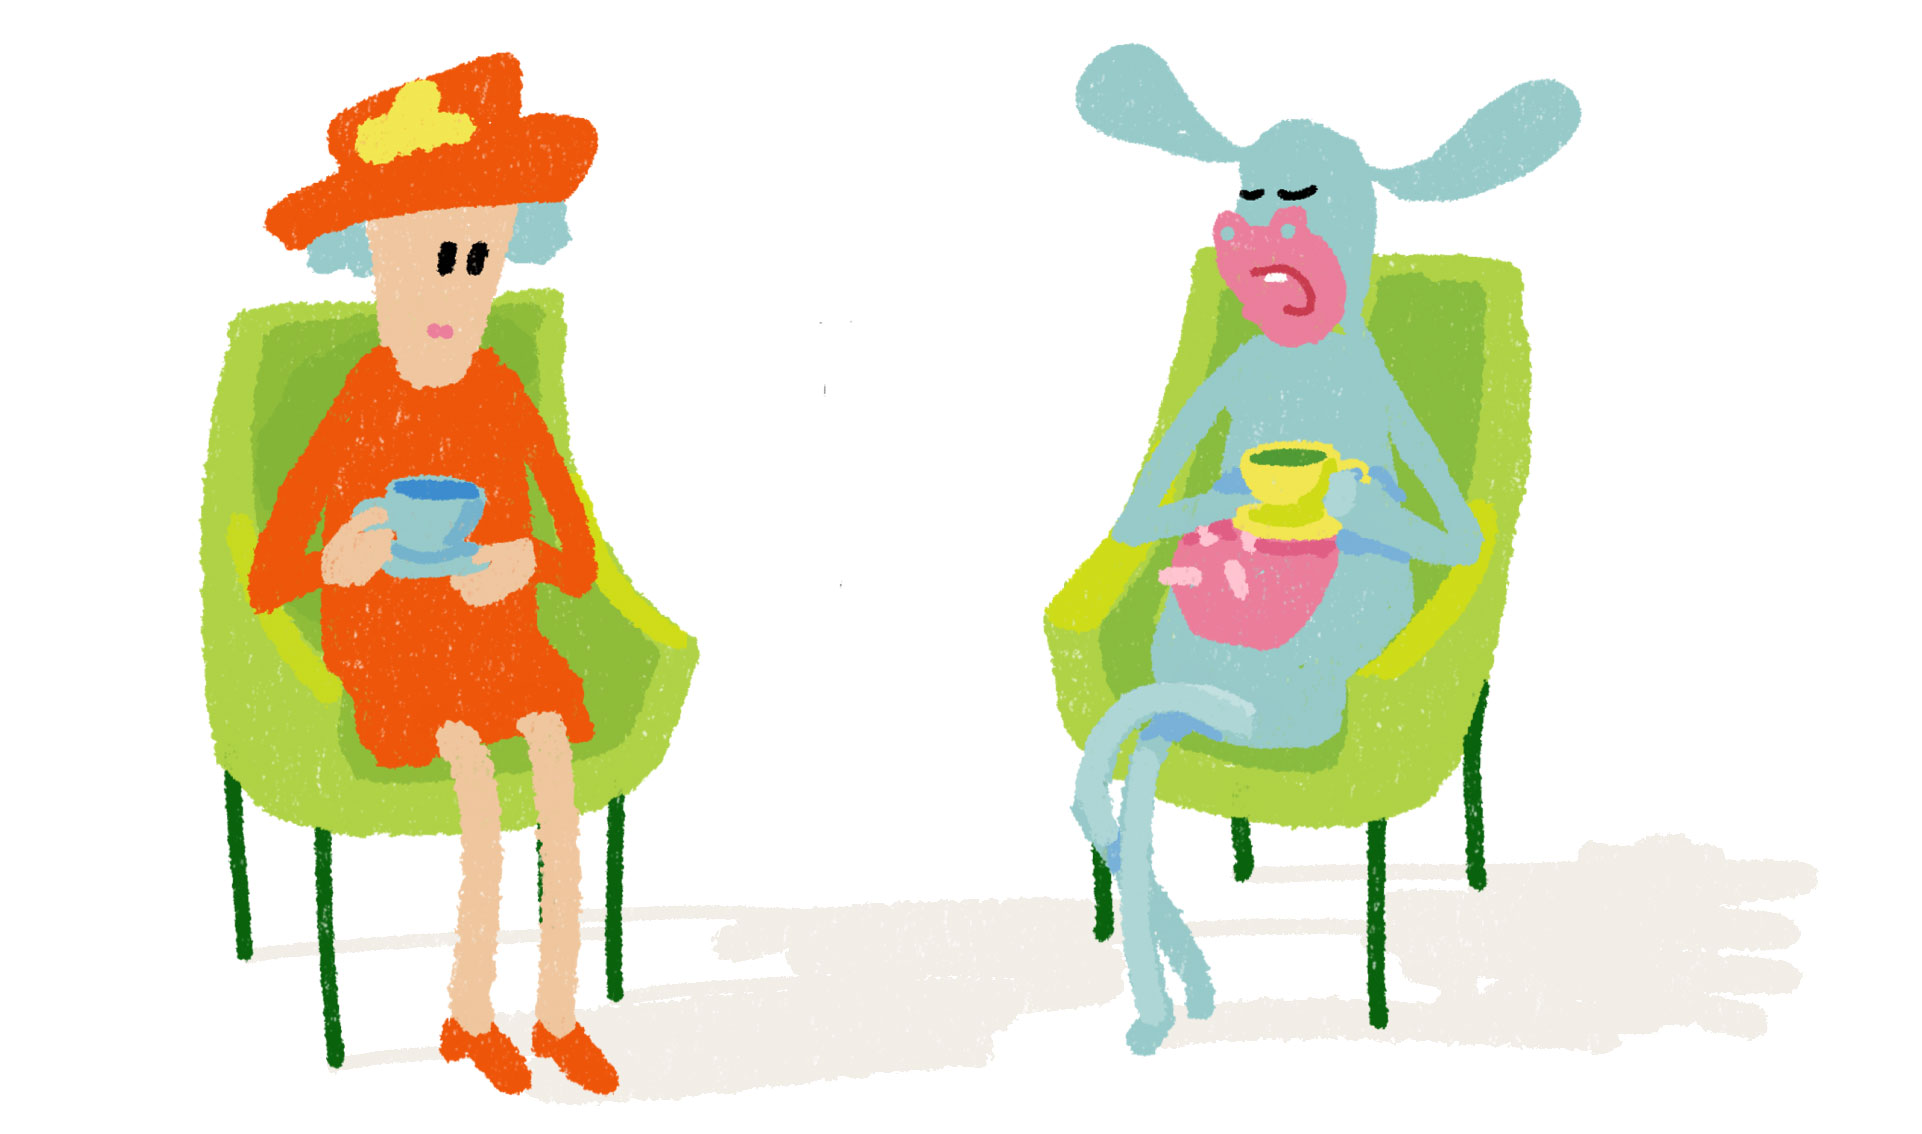 Queen and cow talking over tea